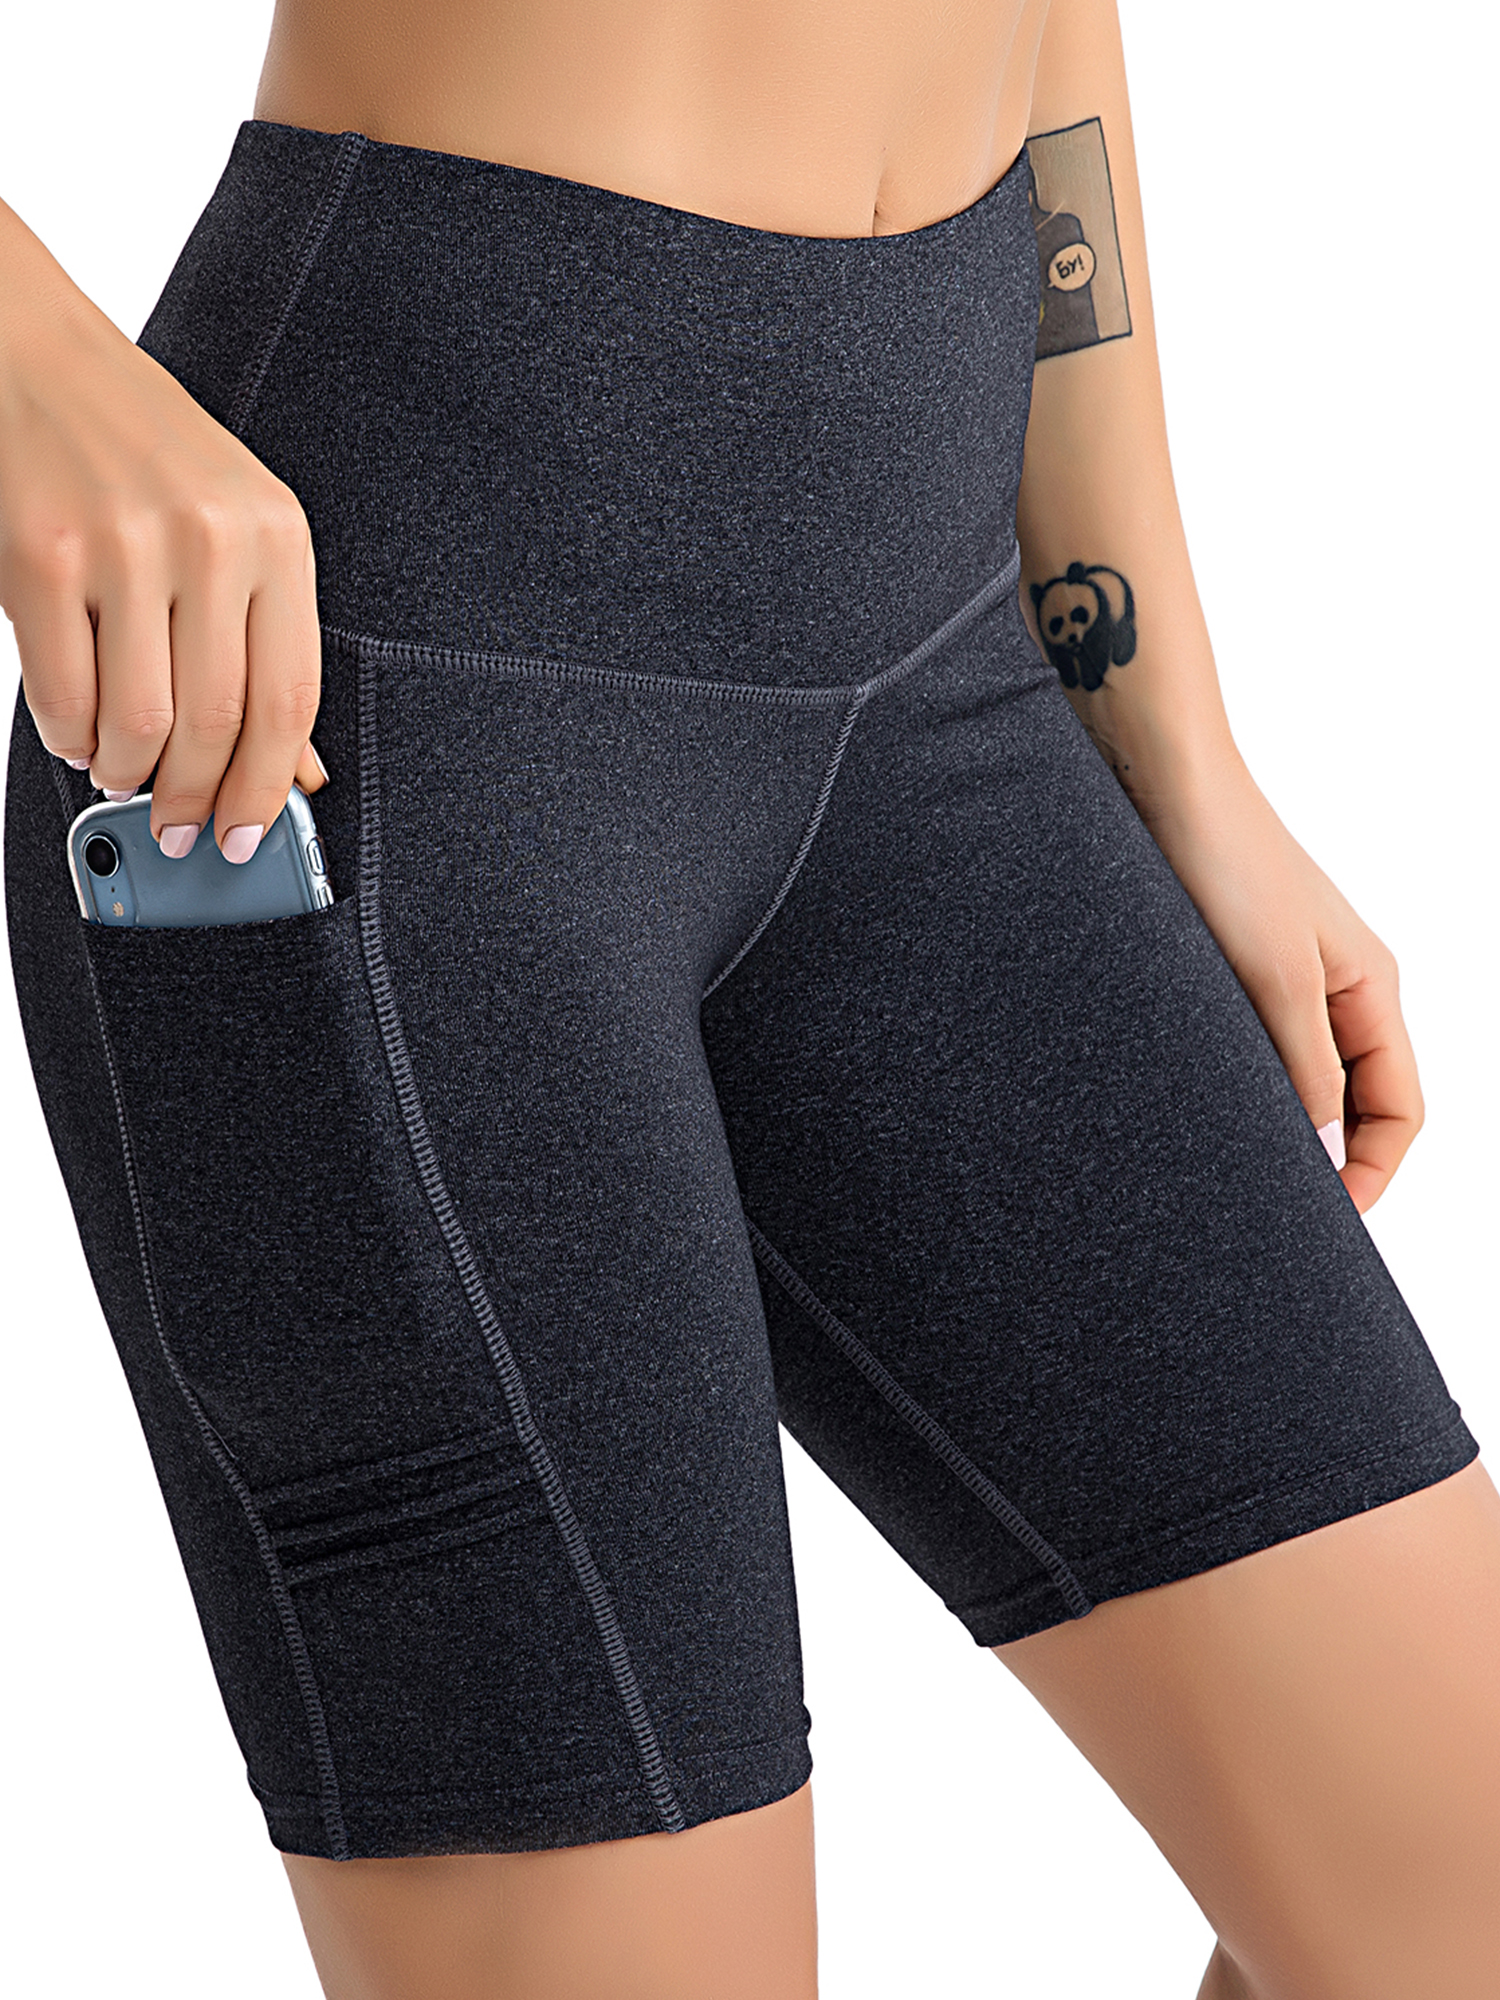 Tummy Control Yoga Shorts with Pockets for Women Workout Running Athletic Bike High Waist Activewear Bottoms - image 1 of 8